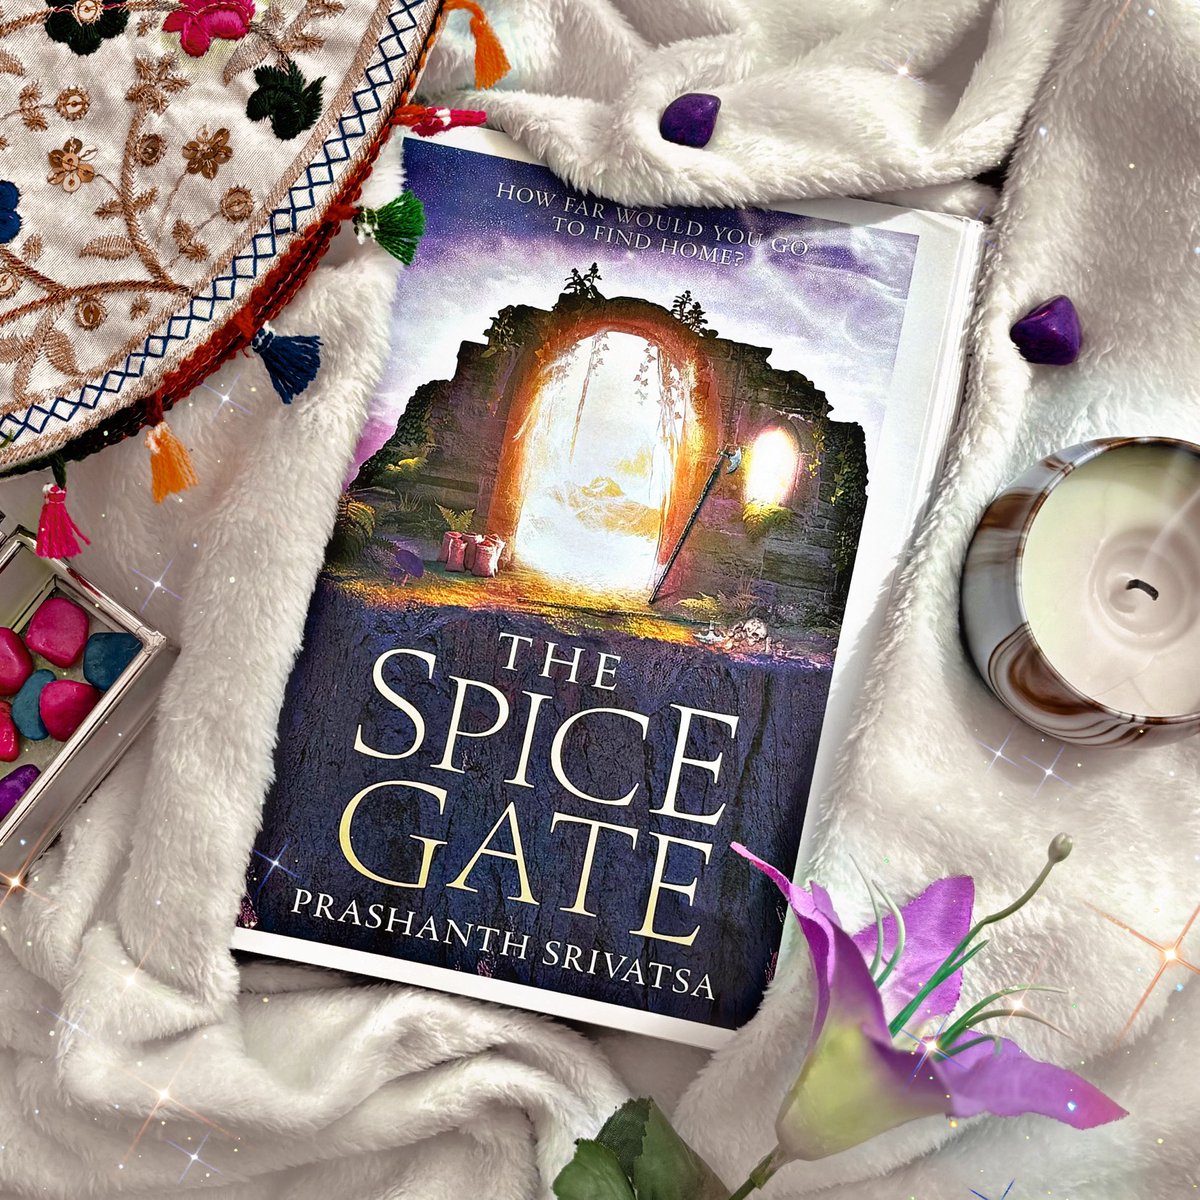 Thank you @HarperVoyagerUK for this copy of The Spice Gate by @prashatsa (out in July) This is a sci-fi/fantasy following Amir, a Spice Carrier who dreams of escape but something is stirring in the hostile spaces between the kingdoms… I’m really looking forward to this one!